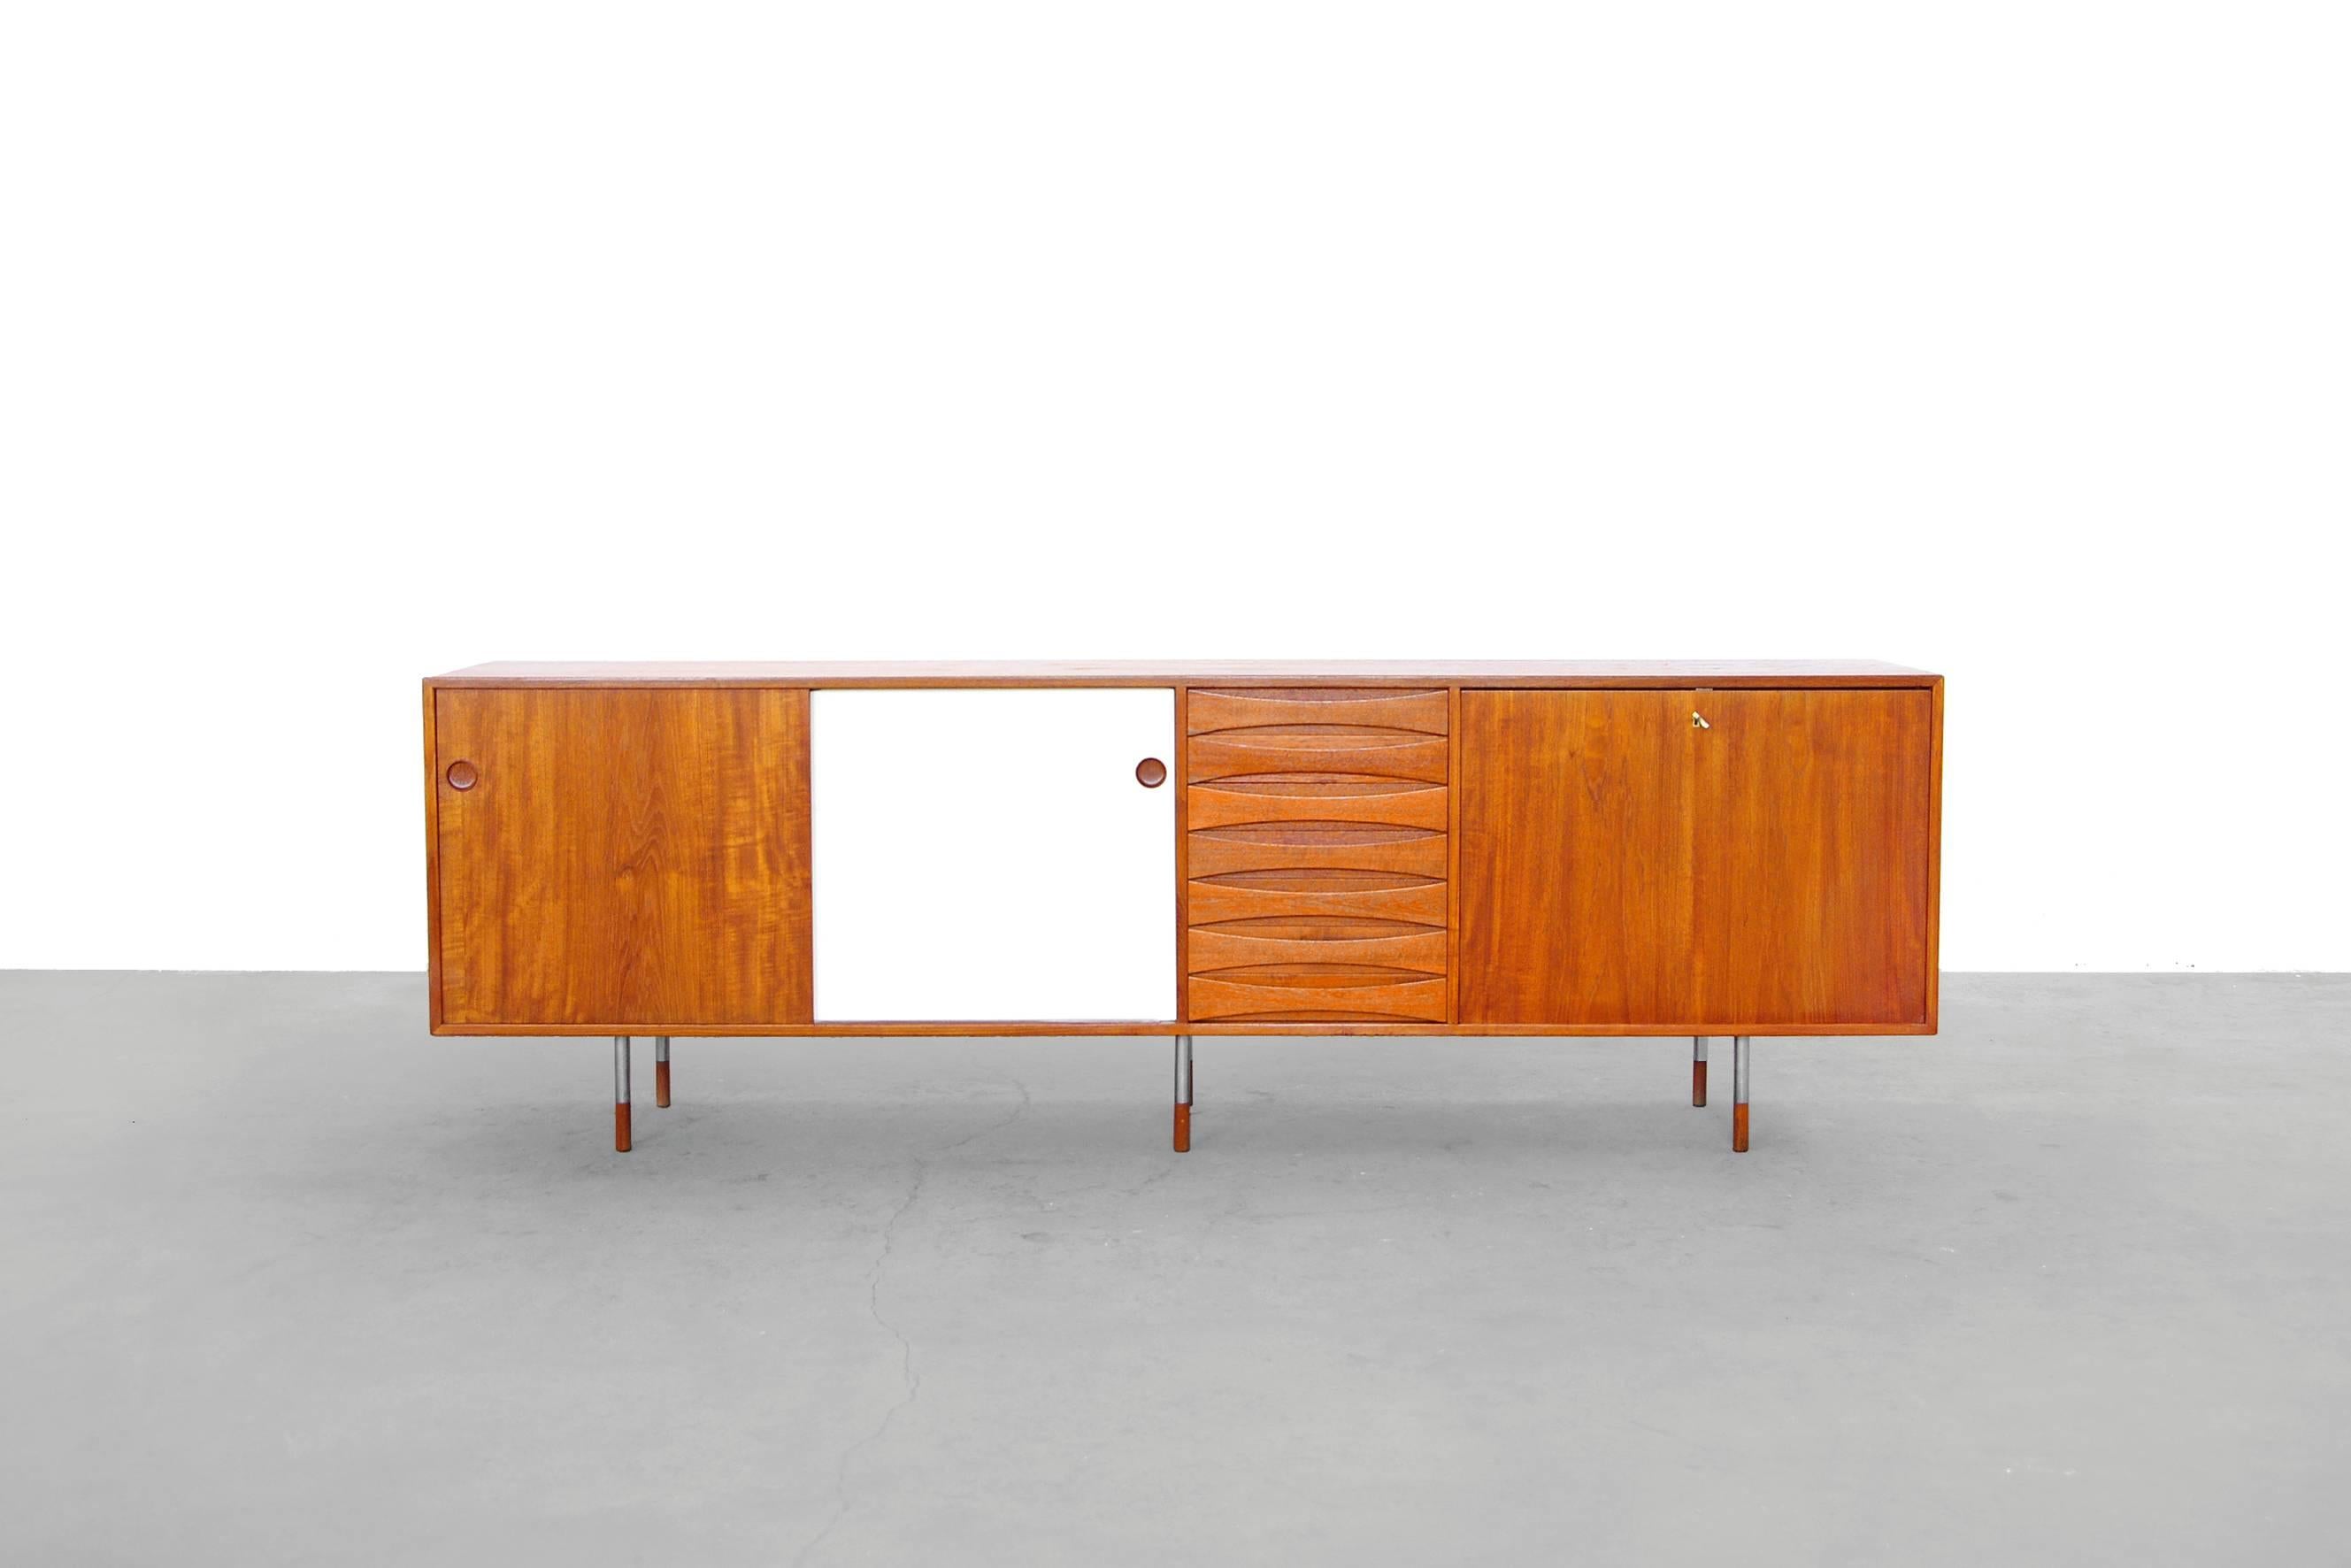 Rare teak A29 sideboard by Arne vodder for Sibast 1959.
With two colored reversable sliding doors, 7 drawers and one lockable clap door. This model comes with beautiful slender metal-wood feets.
The condition is overall good. Some repaired spots